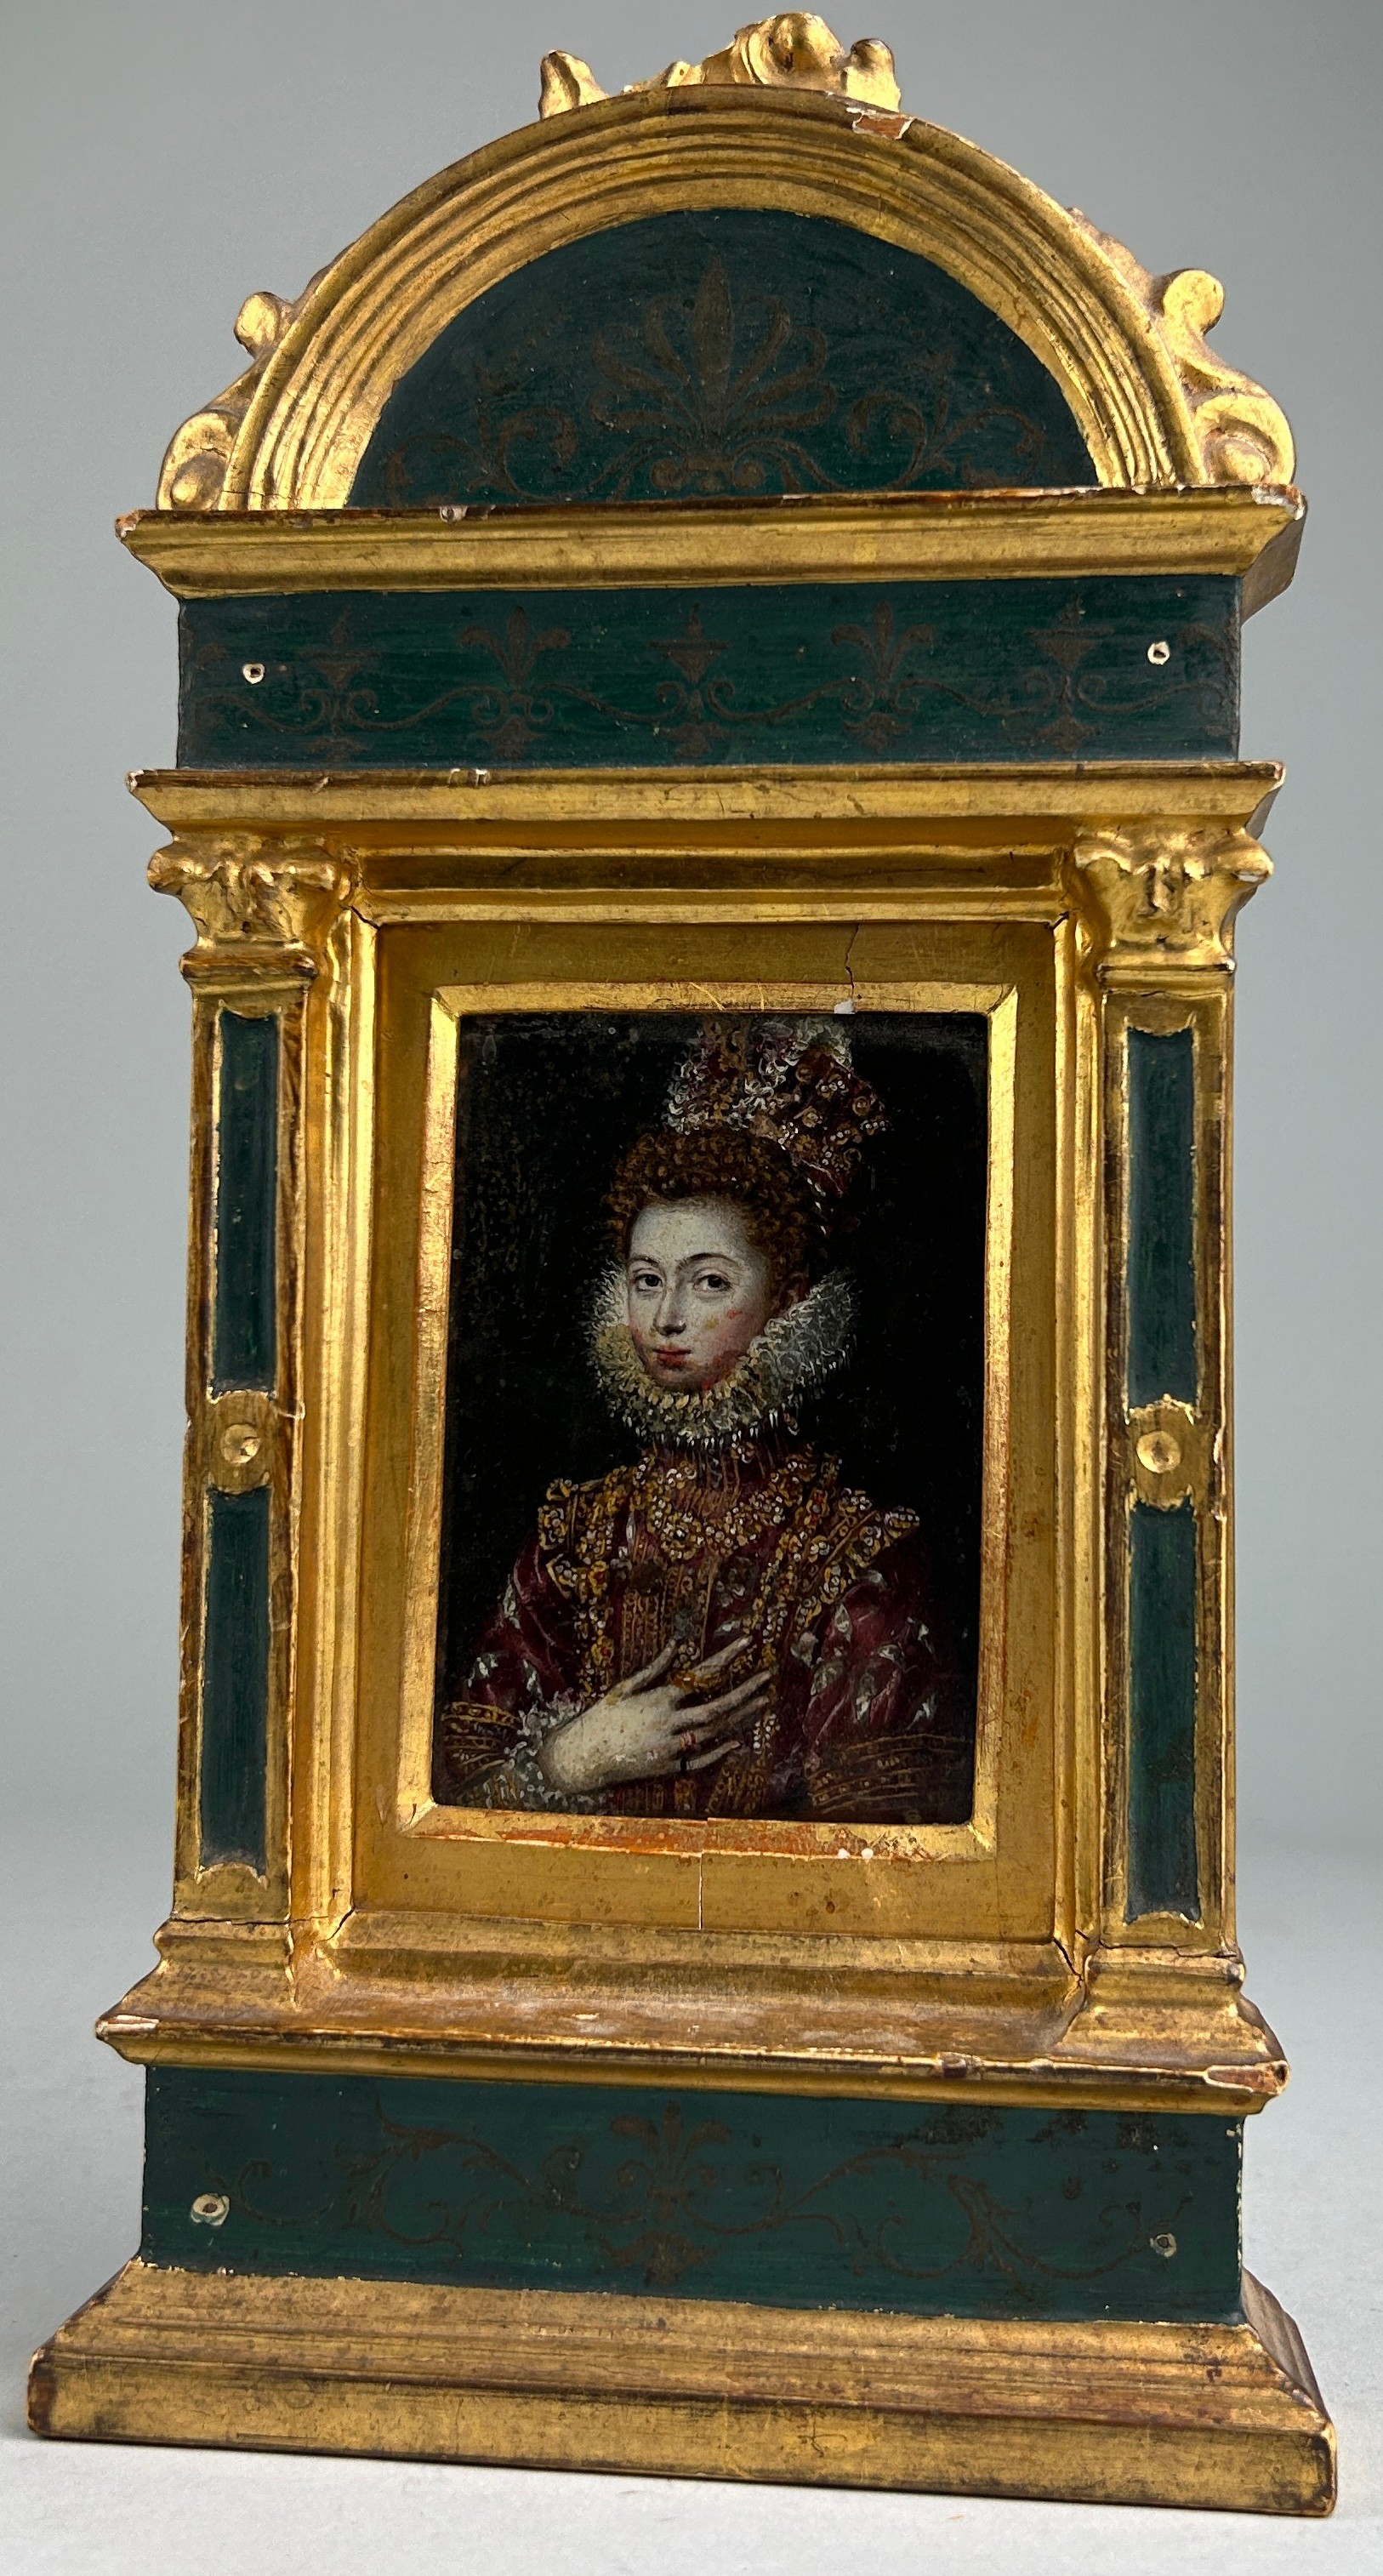 EARLY 17TH CENTURY SPANISH SCHOOL: MINIATURE PORTRAIT PAINTING PROBABLY DEPICTING ISABELLA CLARA - Image 2 of 5